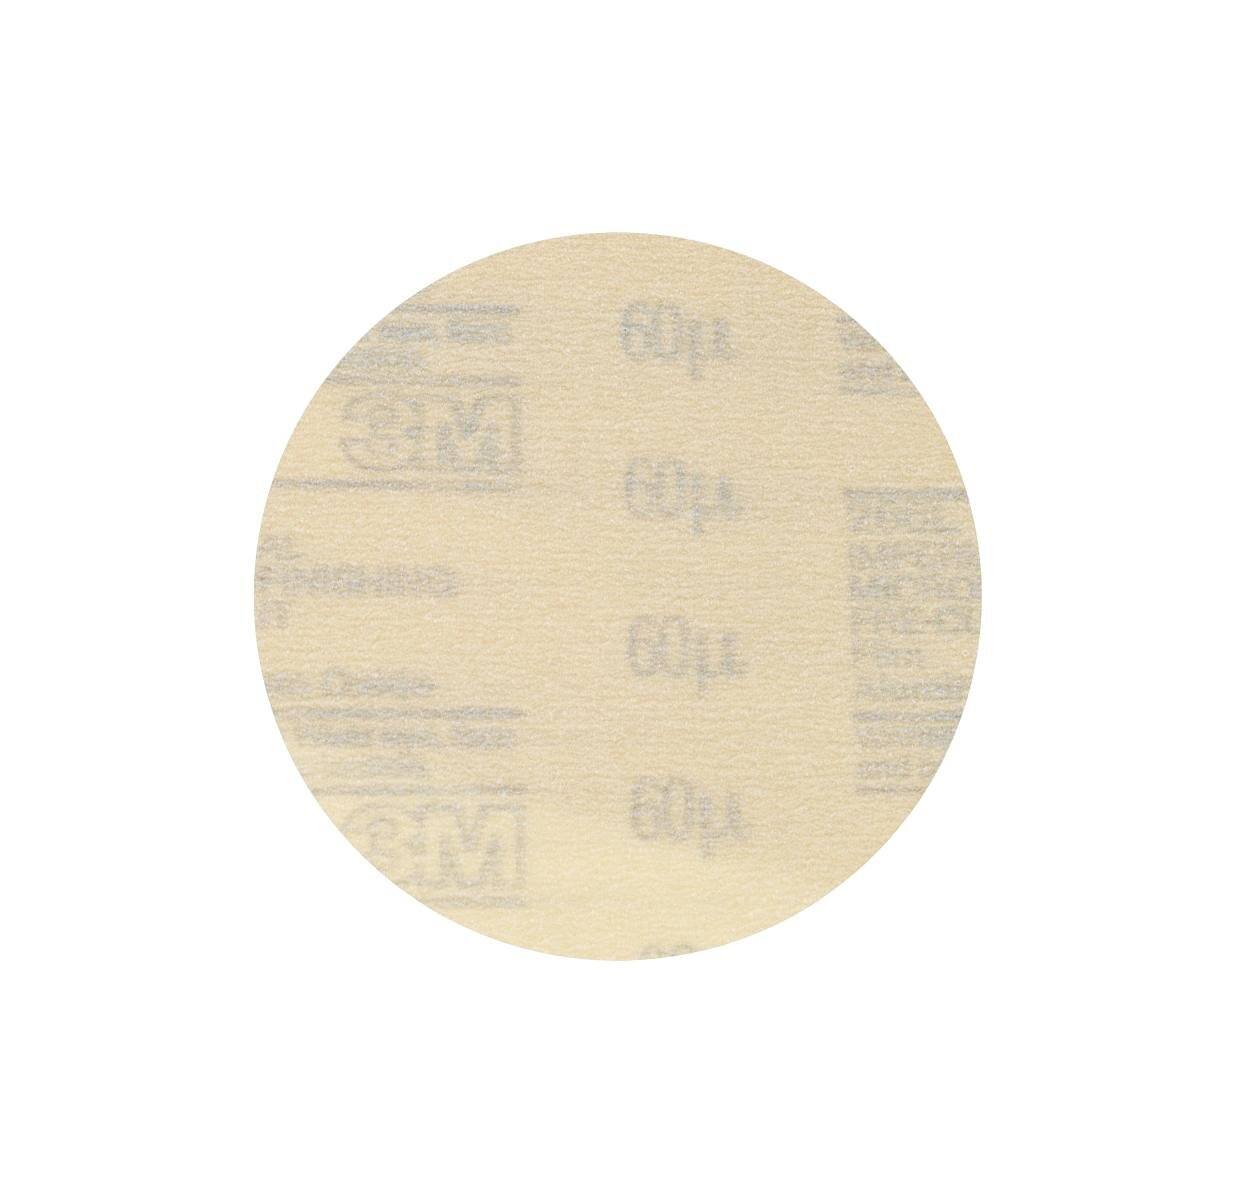 3M Hookit Velcro-backed microfinishing film disc 266L, 125 mm, 60 microns, non-perforated